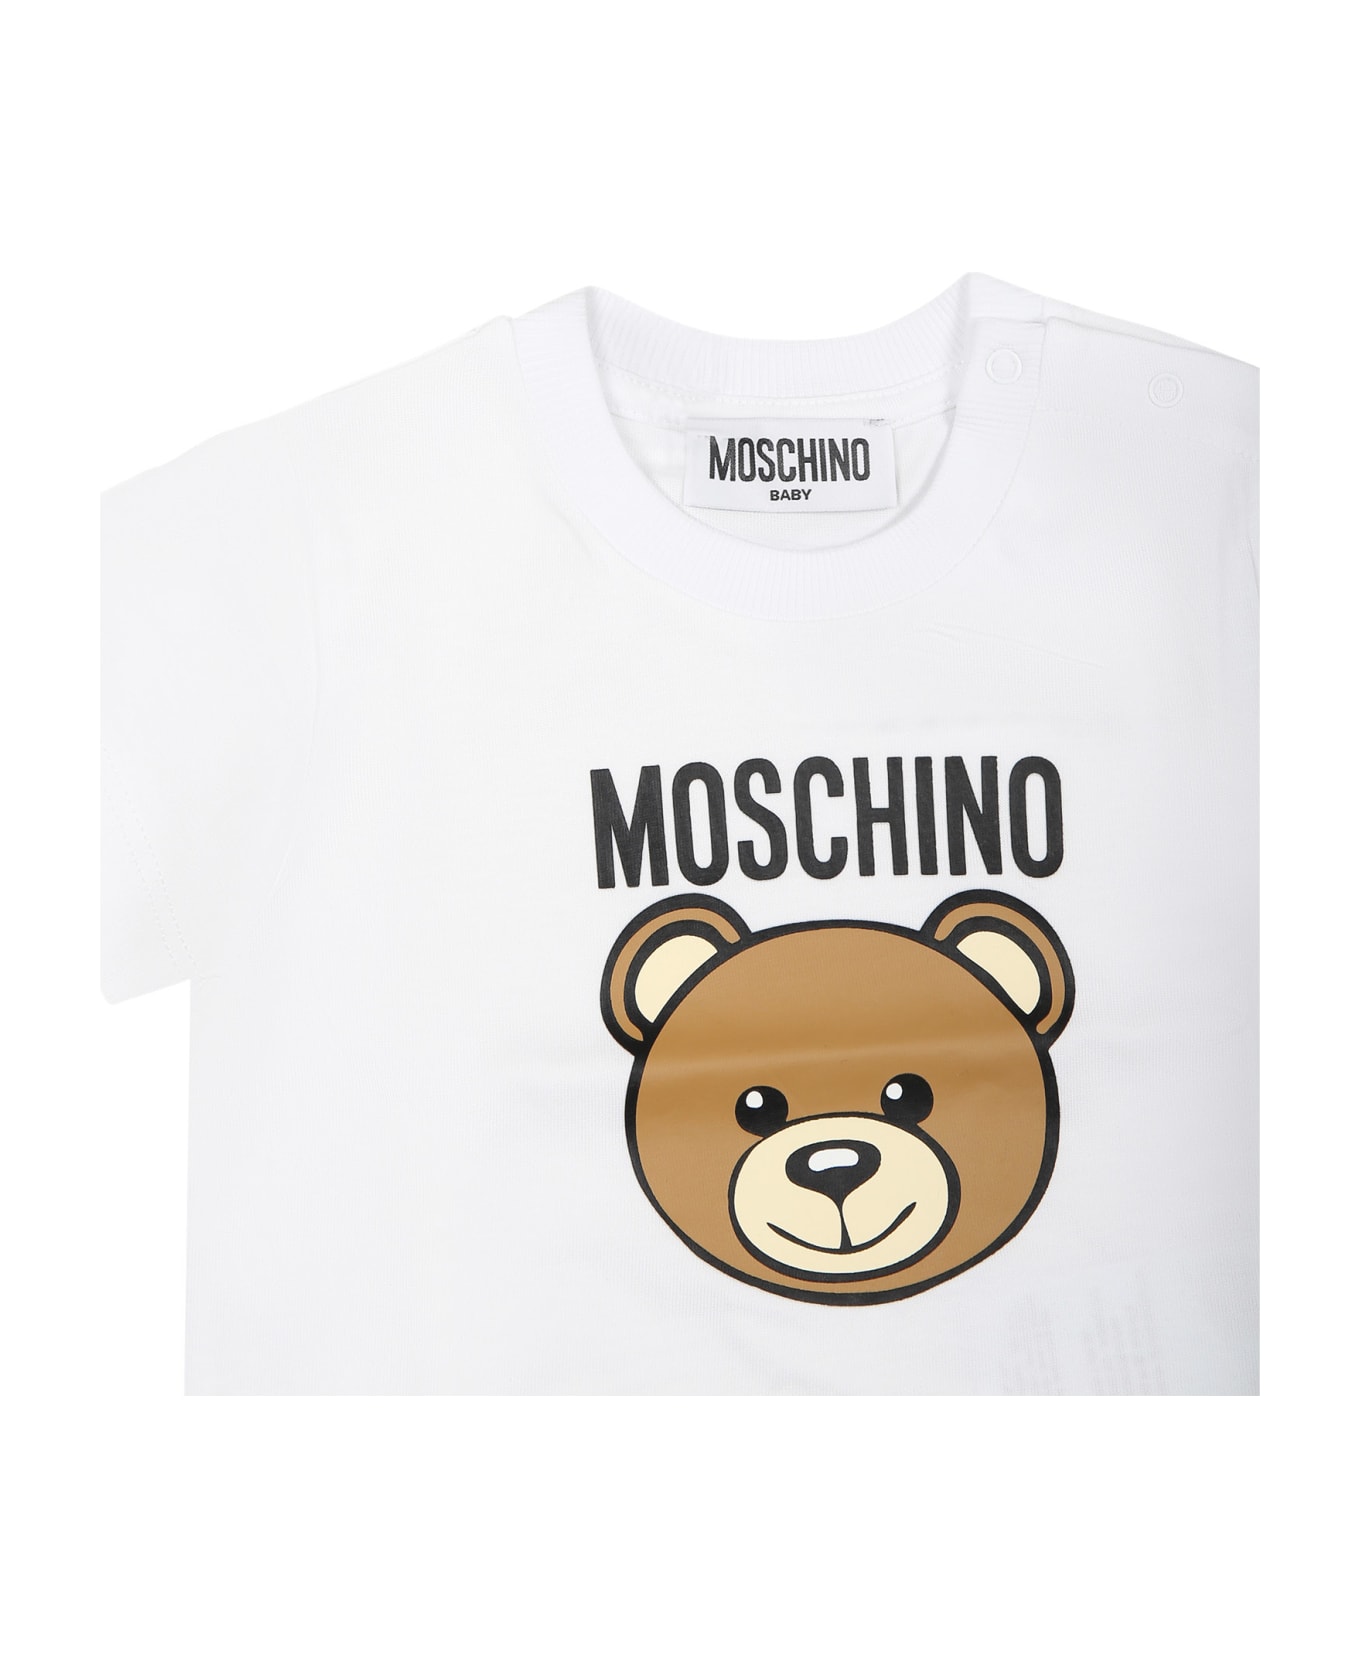 Moschino White T-shirt For Baby Kids With Teddy Bear - White